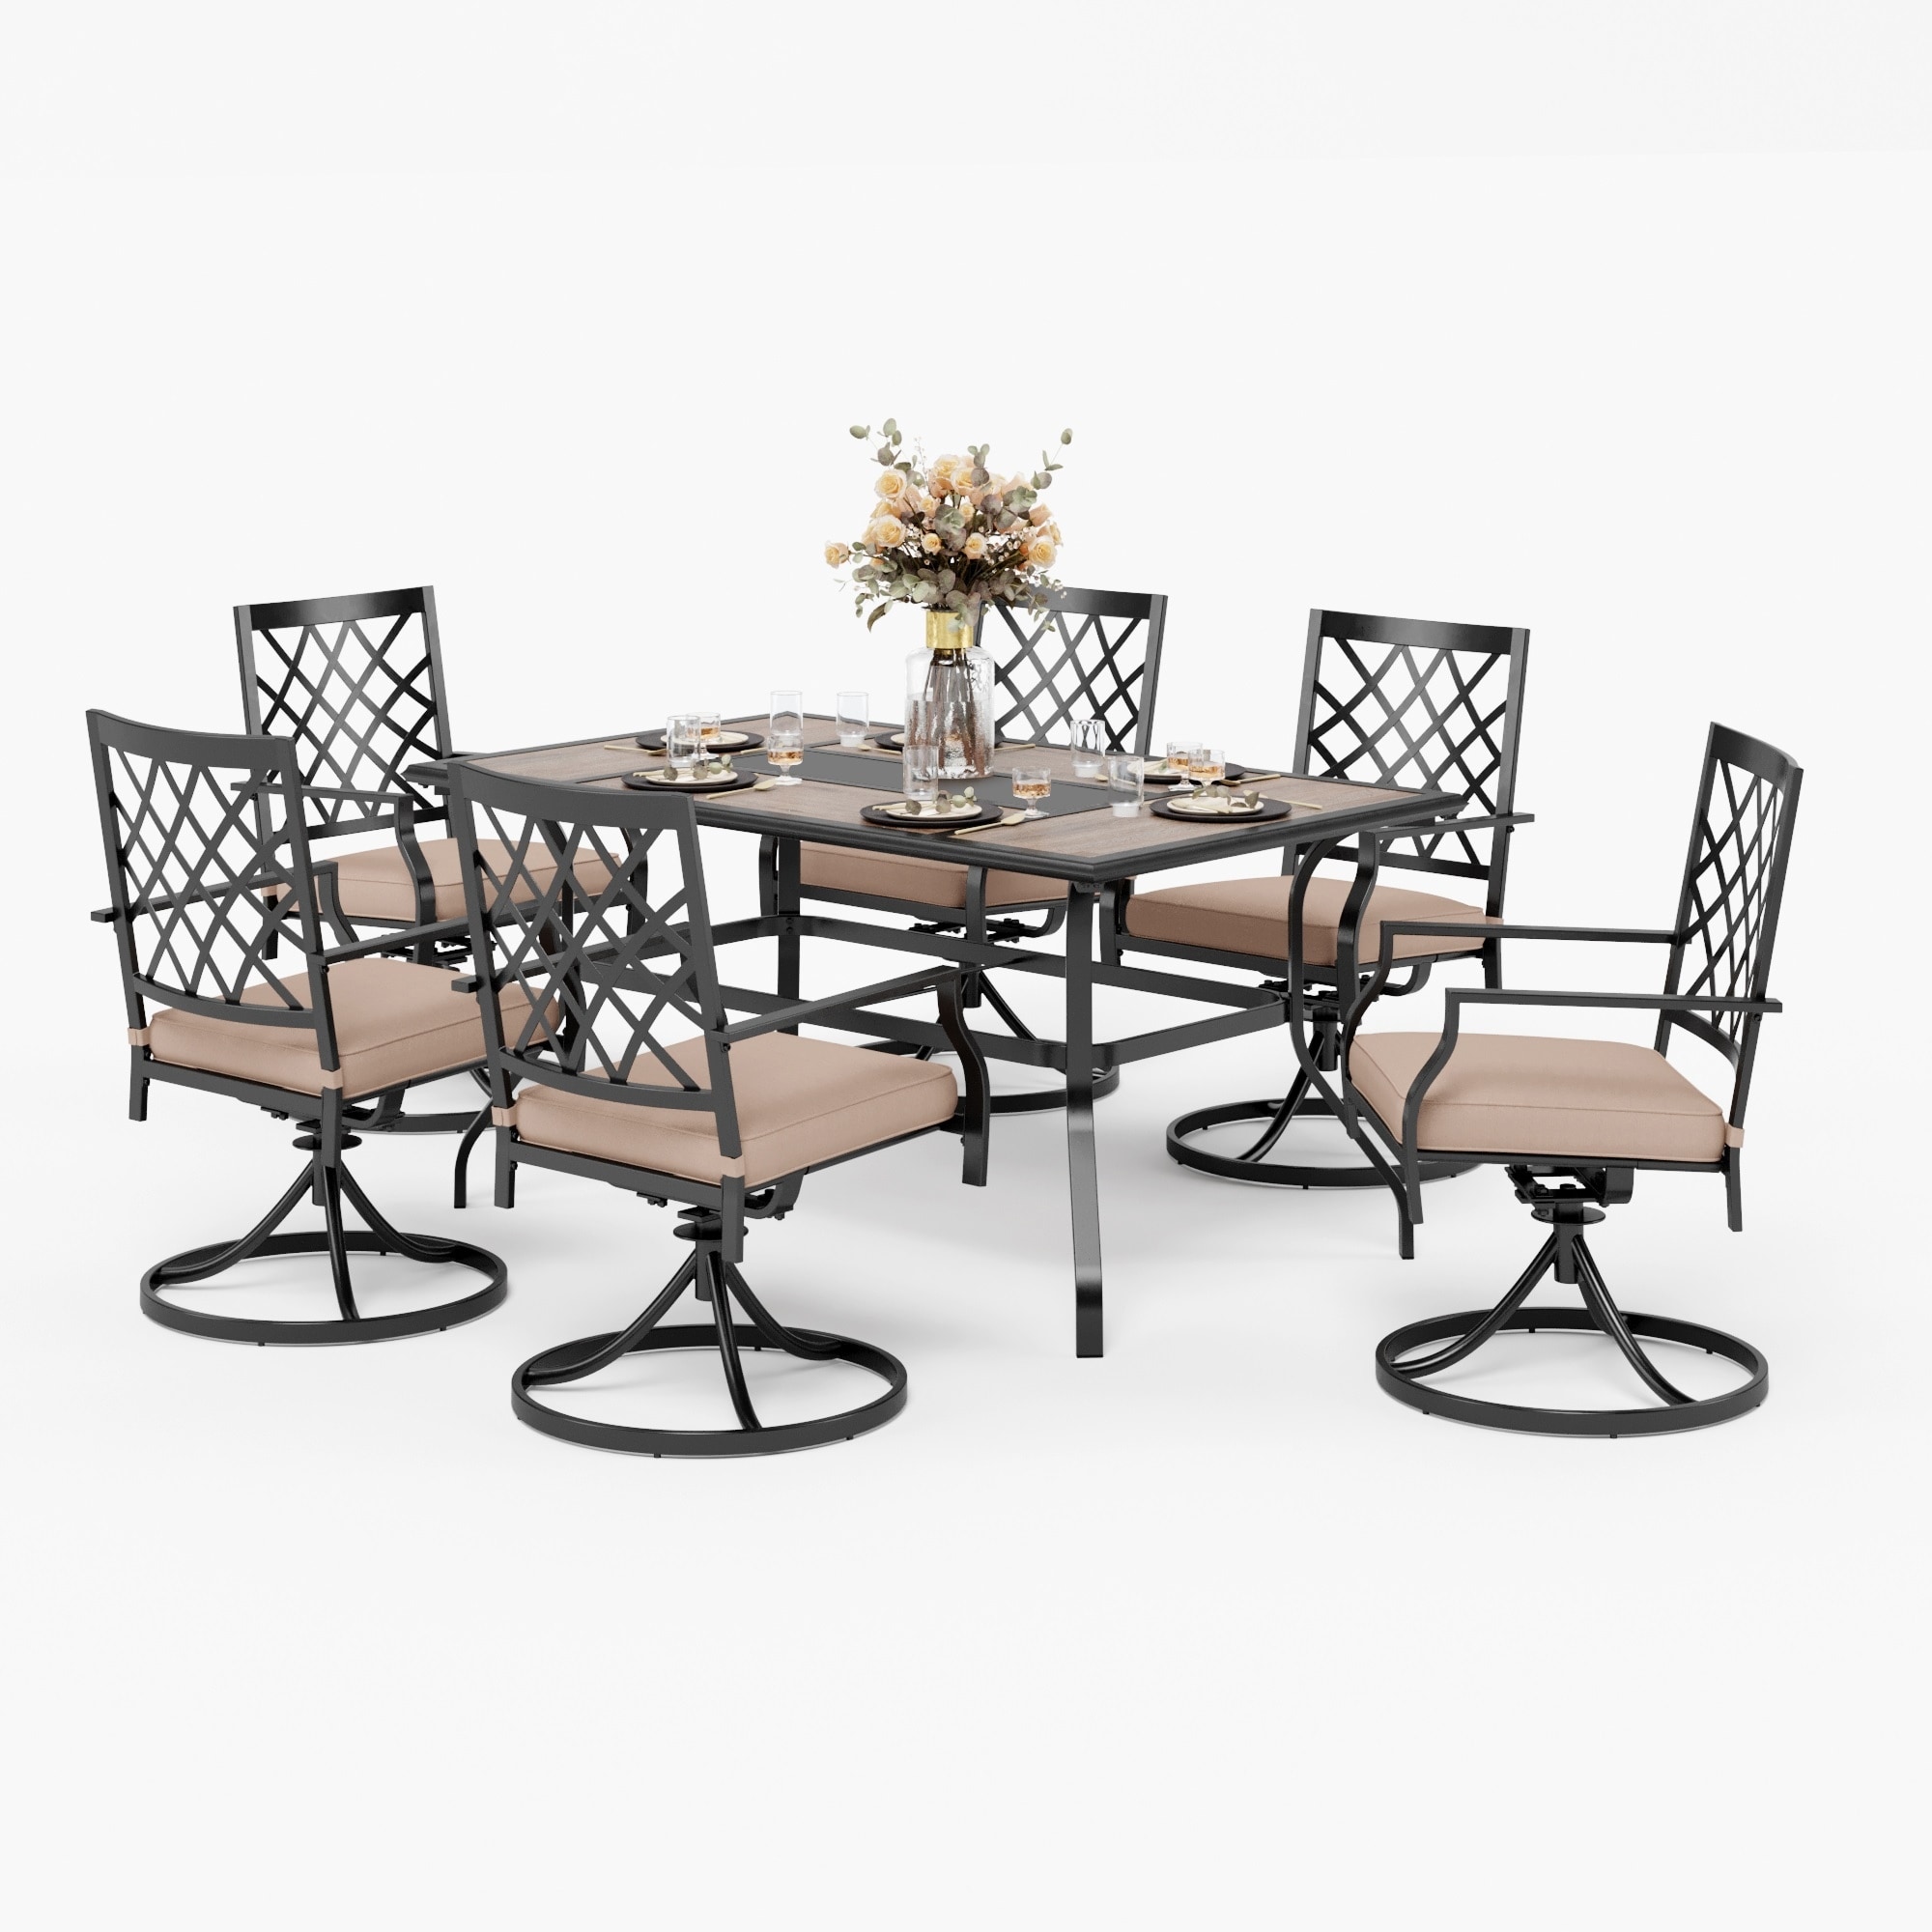 Outdoor Patio Dining Set 7 Pieces Metal Furniture Set  6 X Swivel Chairs With 1 Rectangular Umbrella Wood Like Table